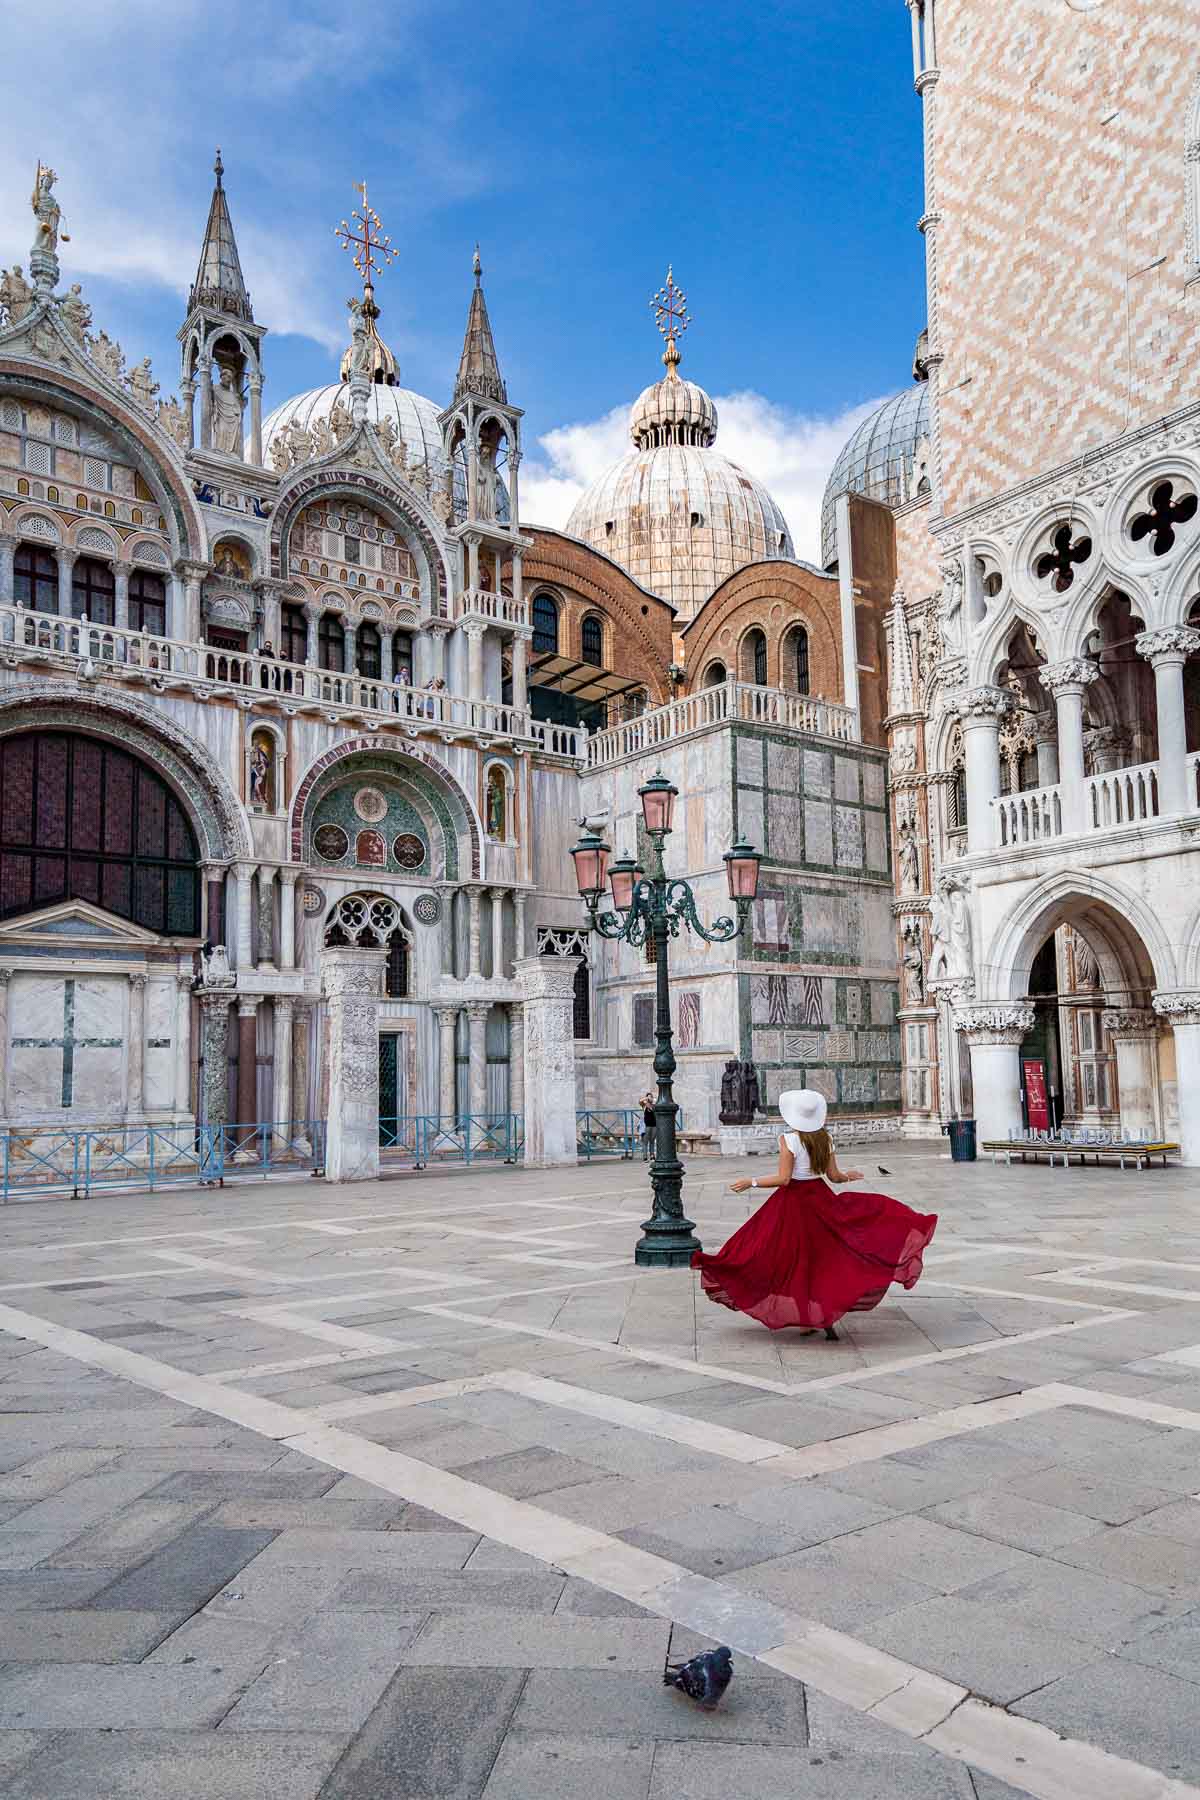 Girl in a red skirt twirling in St. Mark's Square in Venice, Italy